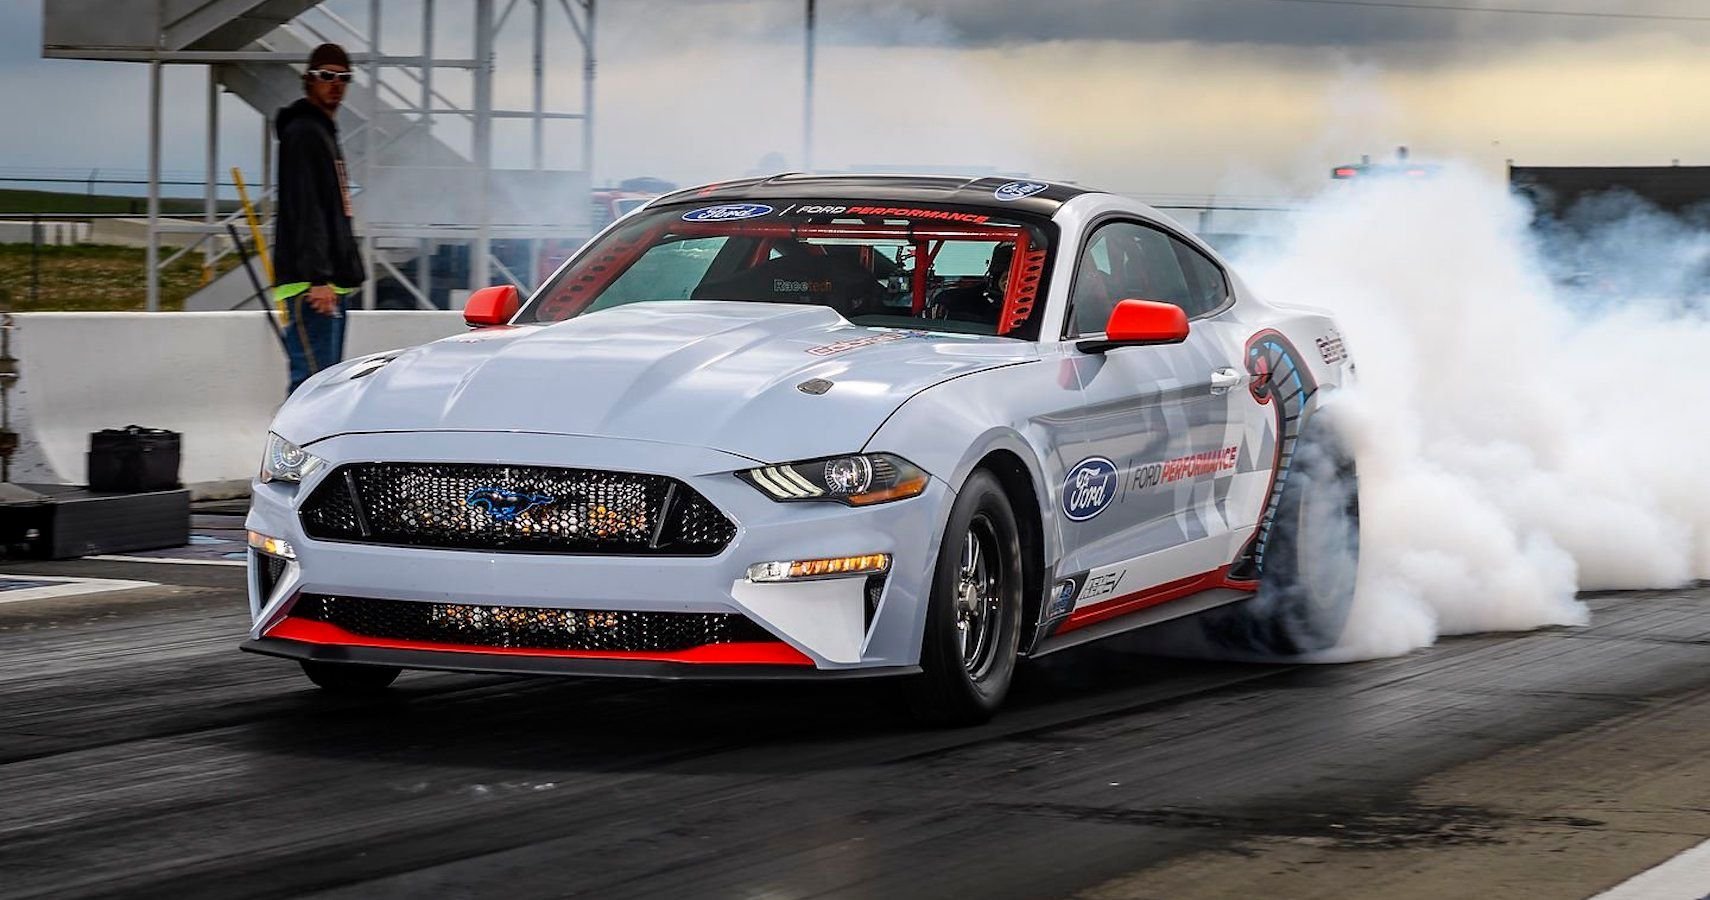 Ford Mustang Cobra Jet Is Here To Crush All Others With 1502 Electric Horses